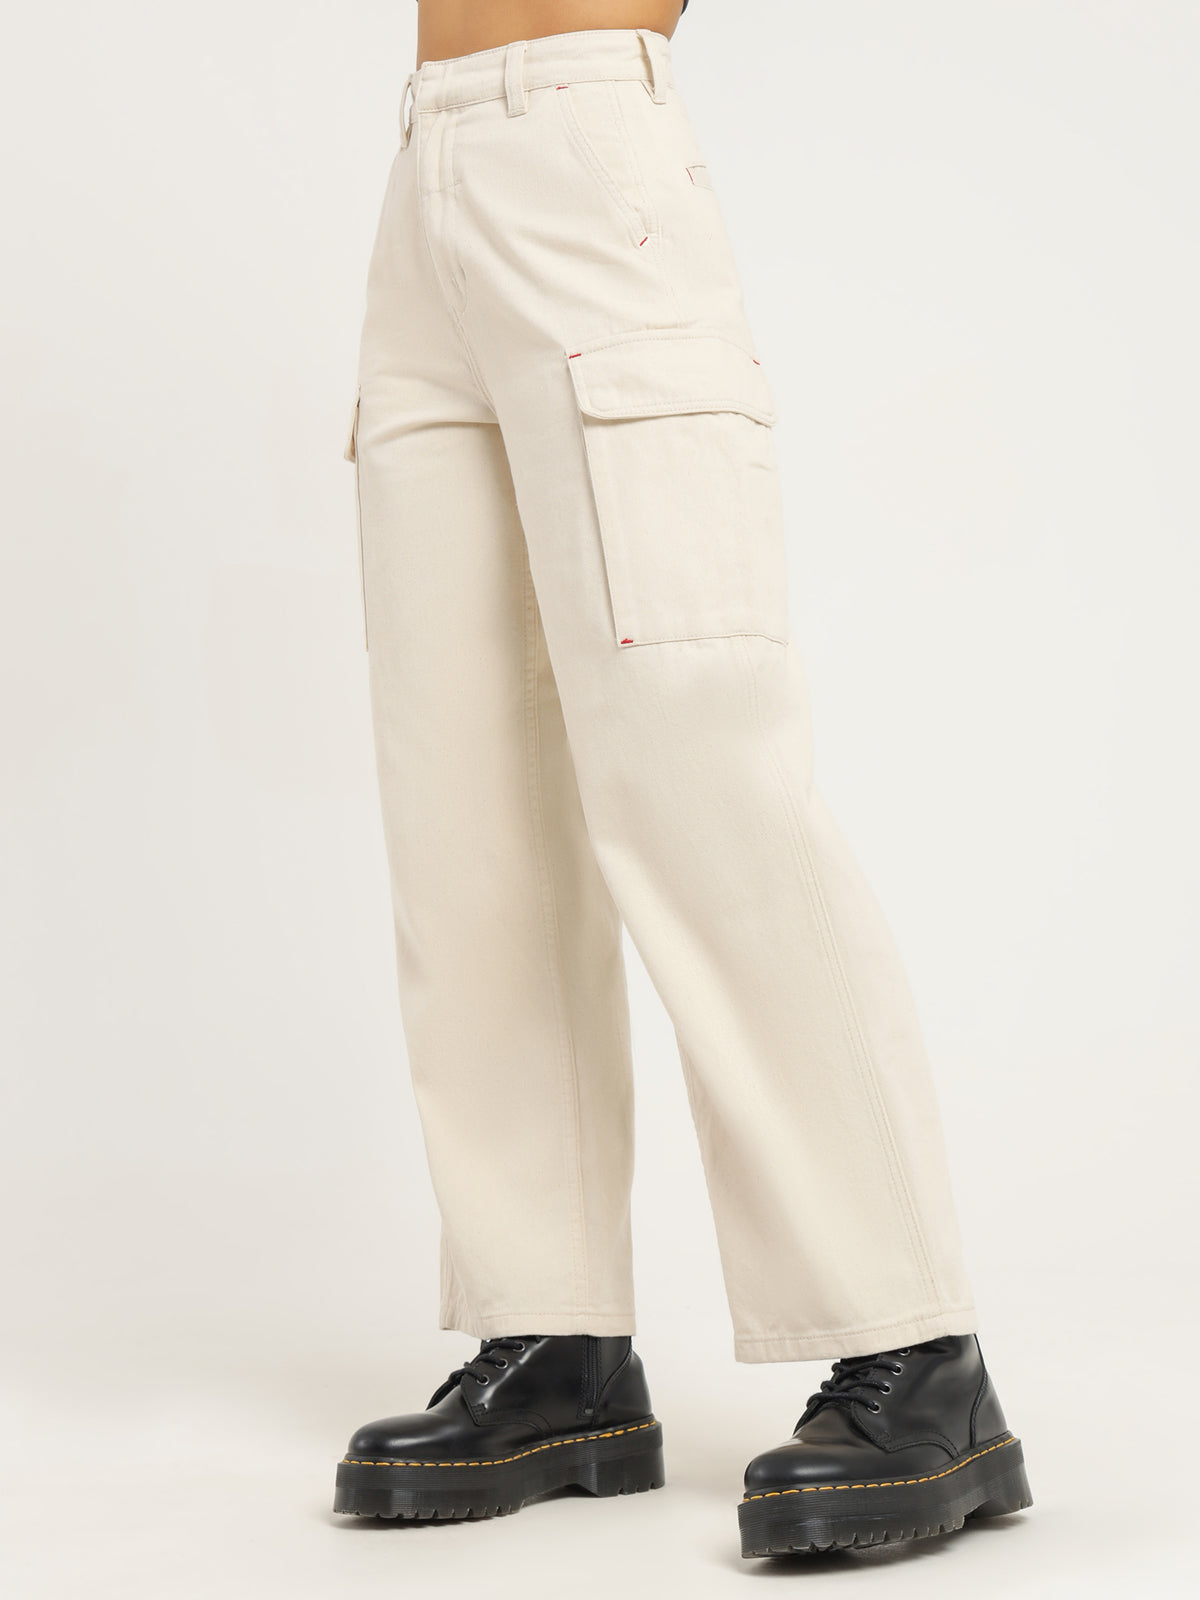 Low Union Baggy Carpenter Pants in Heritage White